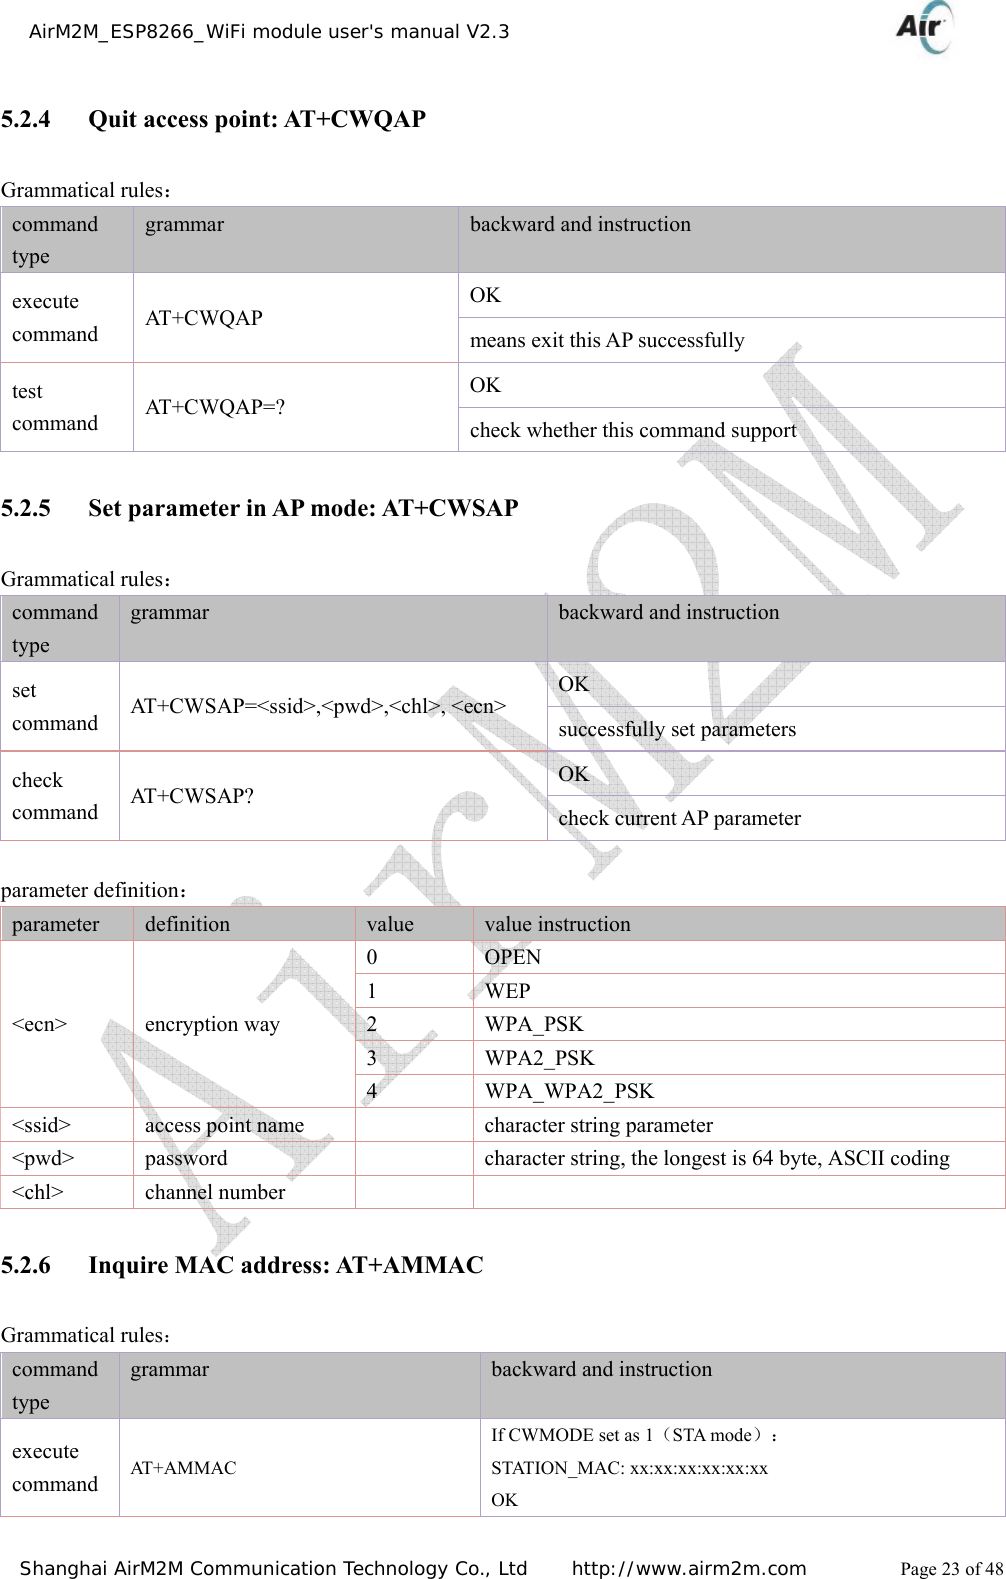    AirM2M_ESP8266_WiFi module user&apos;s manual V2.3   Shanghai AirM2M Communication Technology Co., Ltd     http://www.airm2m.com          Page 23 of 48 5.2.4 Quit access point: AT+CWQAP Grammatical rules： command type grammar  backward and instruction execute command  AT+CWQAP  OK  means exit this AP successfully test command  AT+CWQAP=? OK check whether this command support 5.2.5 Set parameter in AP mode: AT+CWSAP Grammatical rules： command type grammar  backward and instruction set command  AT+CWSAP=&lt;ssid&gt;,&lt;pwd&gt;,&lt;chl&gt;, &lt;ecn&gt;   OK  successfully set parameters check command  AT+ CW SAP ? OK check current AP parameter  parameter definition： parameter  definition  value  value instruction &lt;ecn&gt; encryption way 0 OPEN 1 WEP 2 WPA_PSK 3 WPA2_PSK 4 WPA_WPA2_PSK  &lt;ssid&gt;  access point name    character string parameter &lt;pwd&gt;  password    character string, the longest is 64 byte, ASCII coding &lt;chl&gt; channel number    5.2.6 Inquire MAC address: AT+AMMAC Grammatical rules： command type grammar backward and instruction execute command AT+AMMAC  If CWMODE set as 1（STA mode）： STATION_MAC: xx:xx:xx:xx:xx:xx OK  